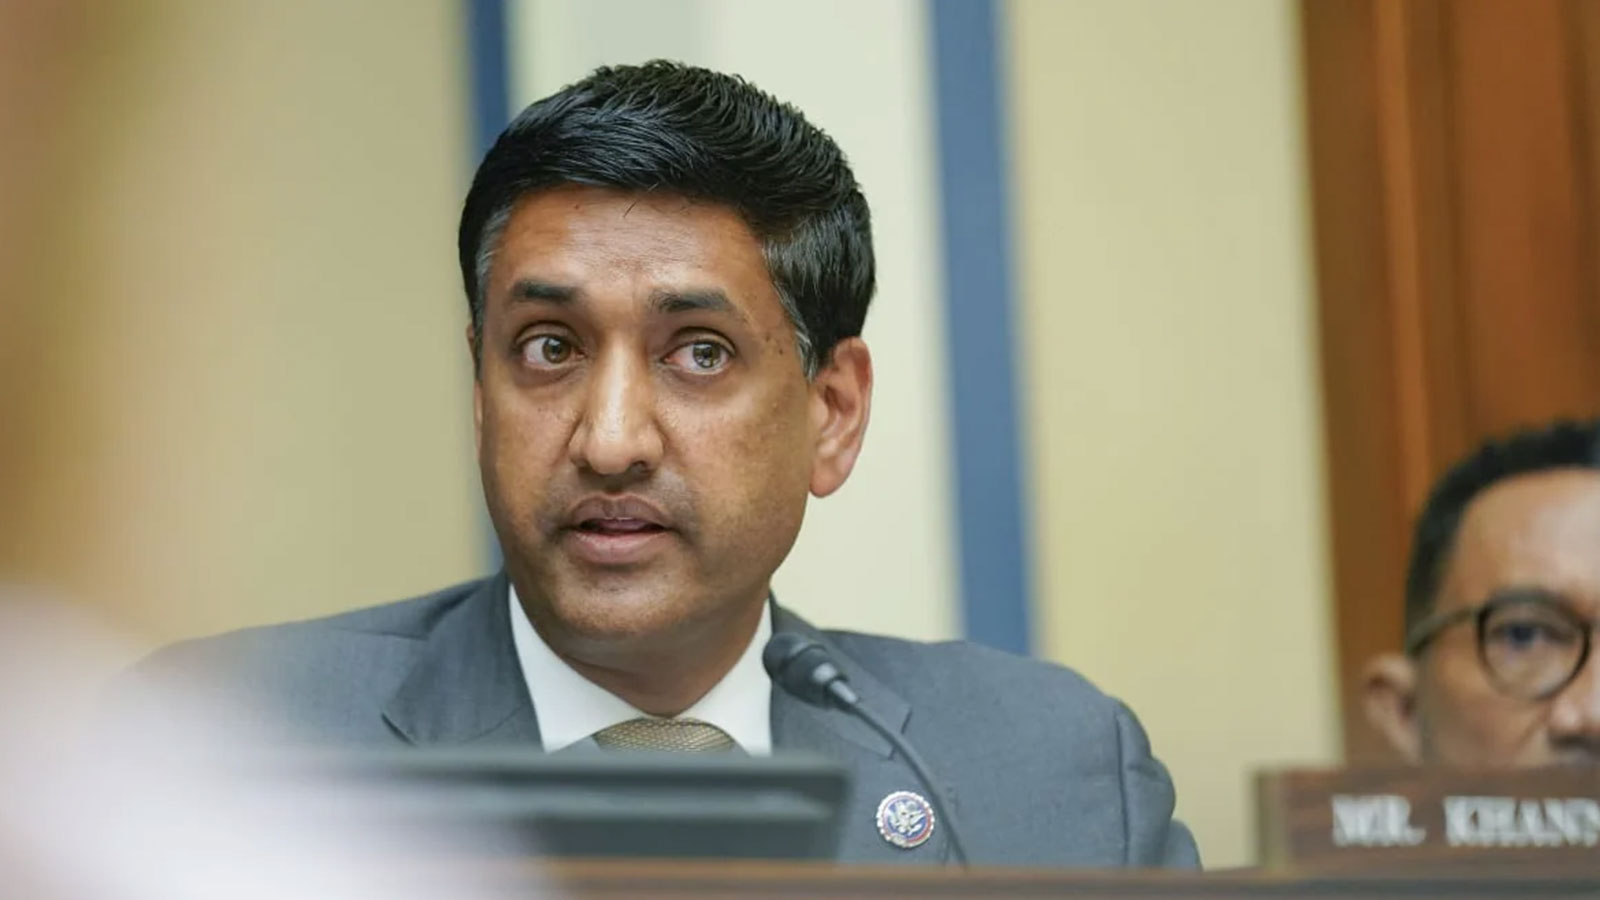 Rep. Khanna and Sen. Padilla introduce PEACE Act to reform police use of force